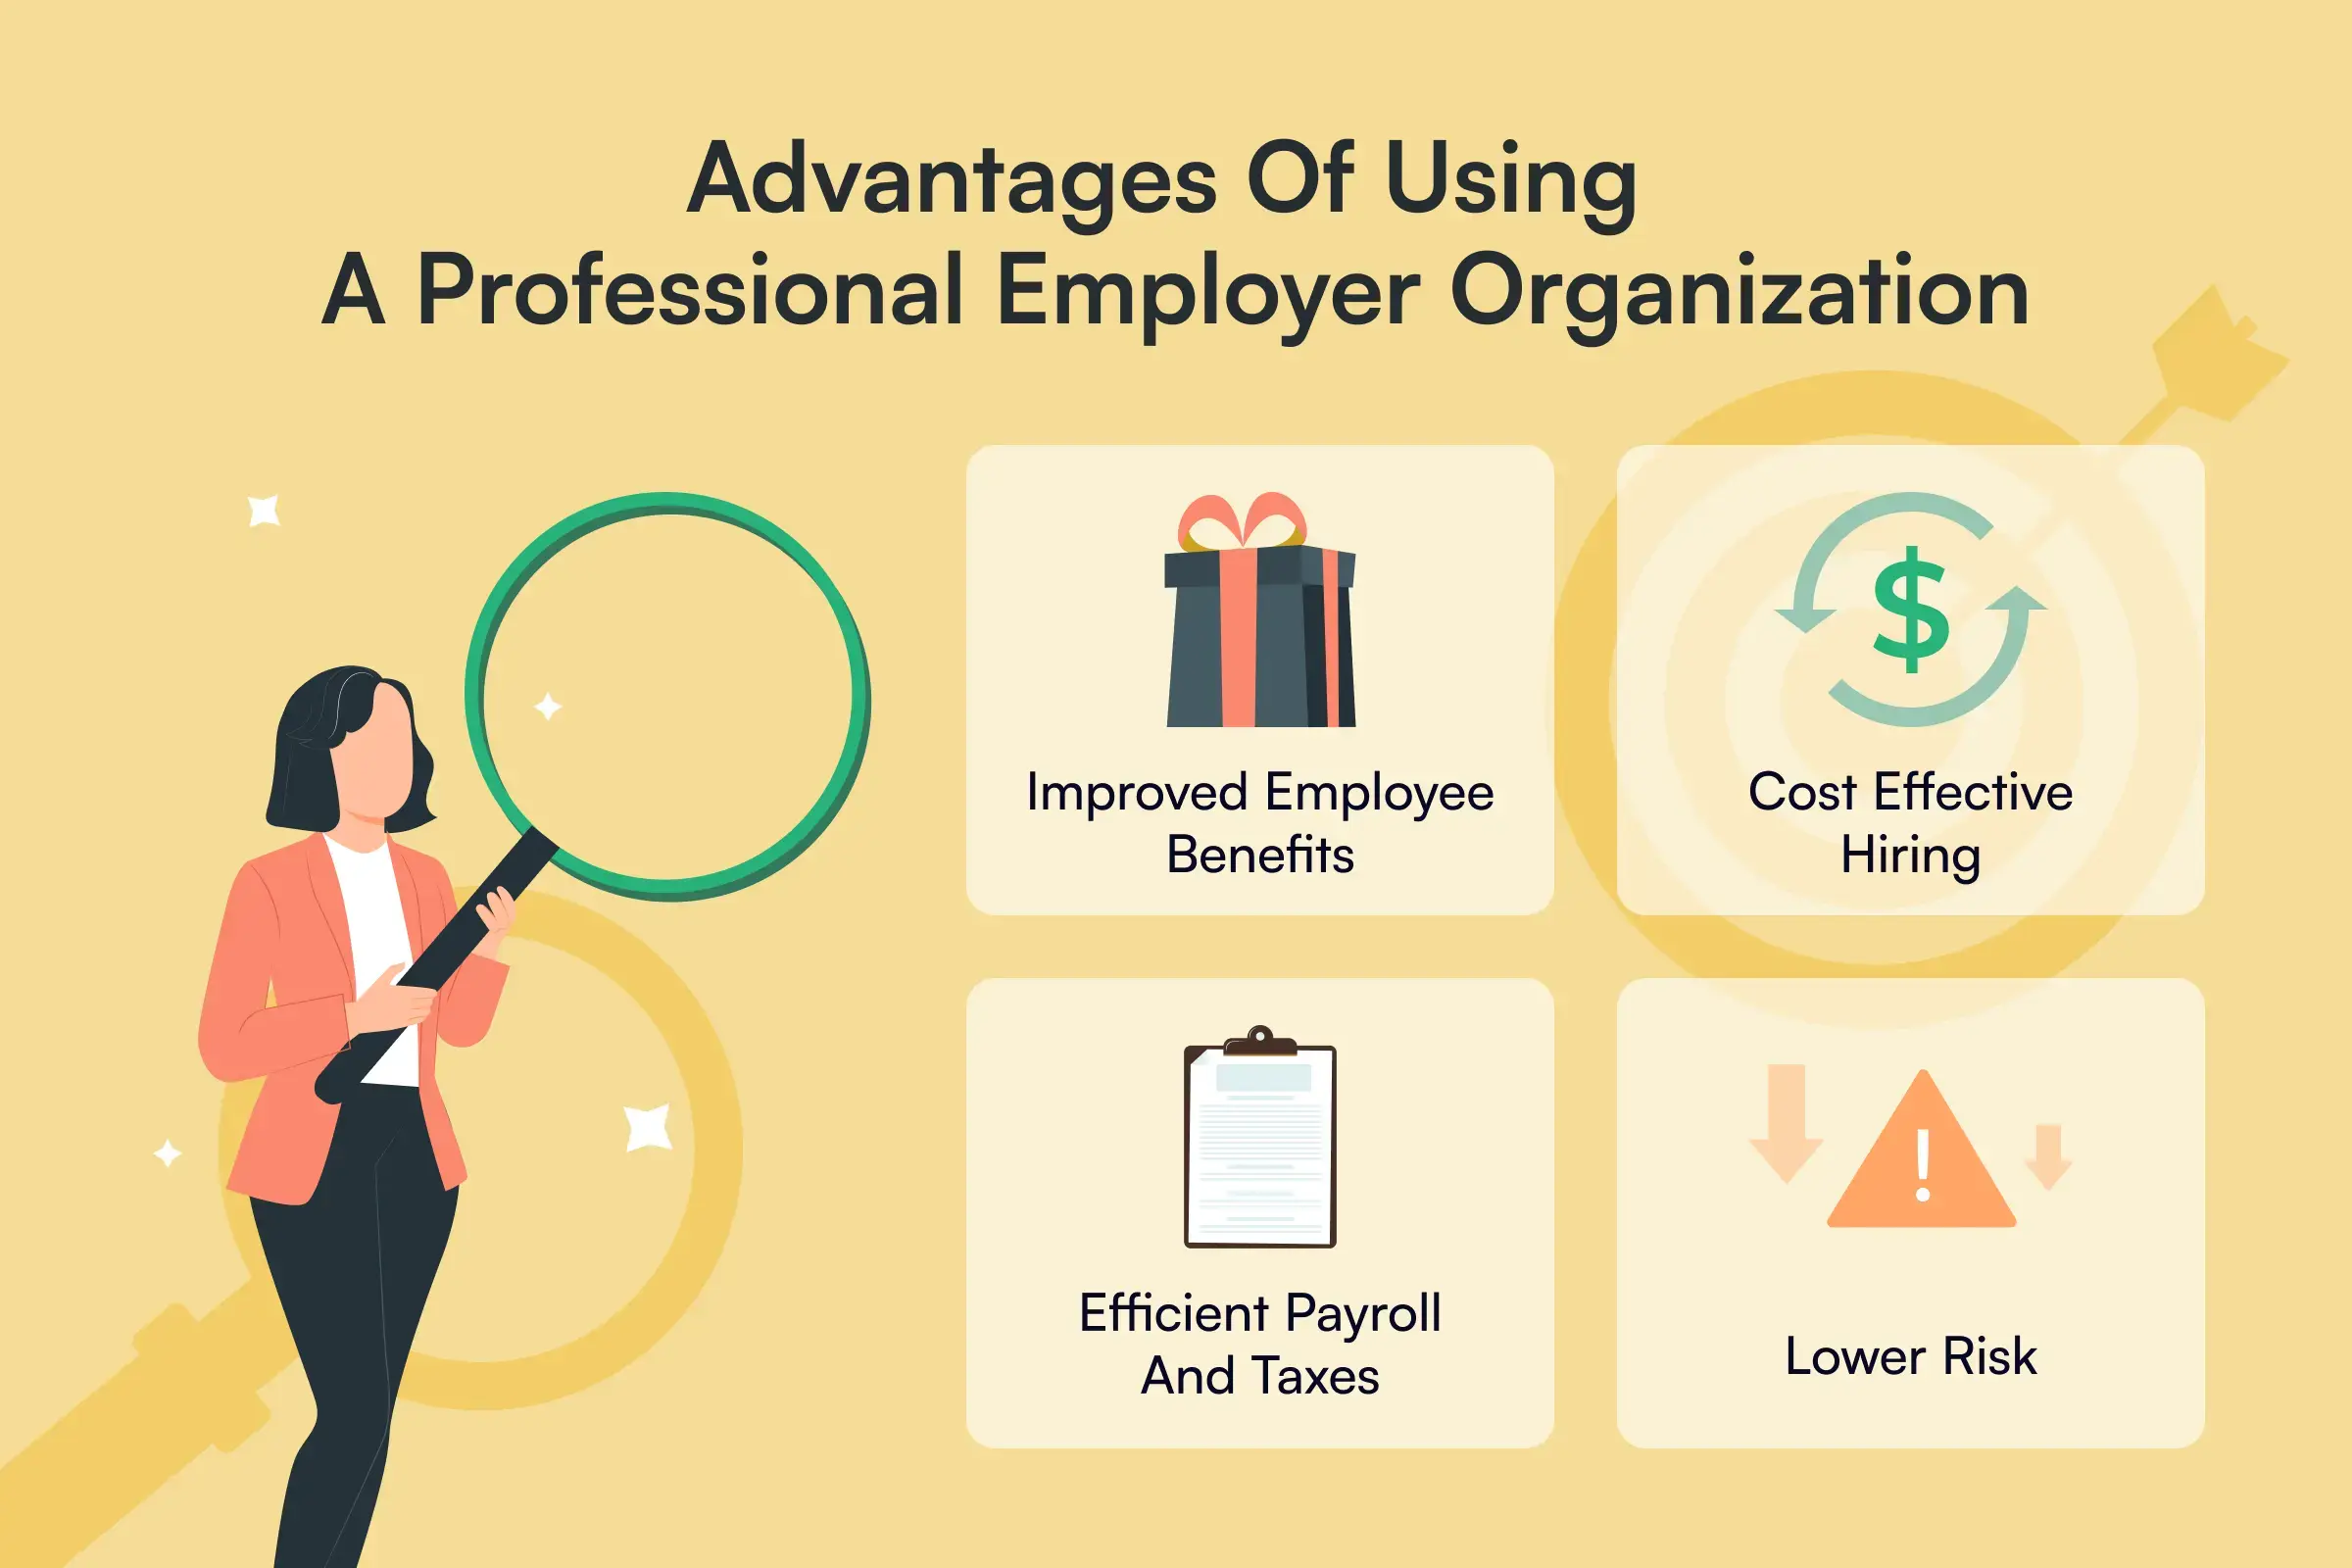 Advantages of using a professional employer organization